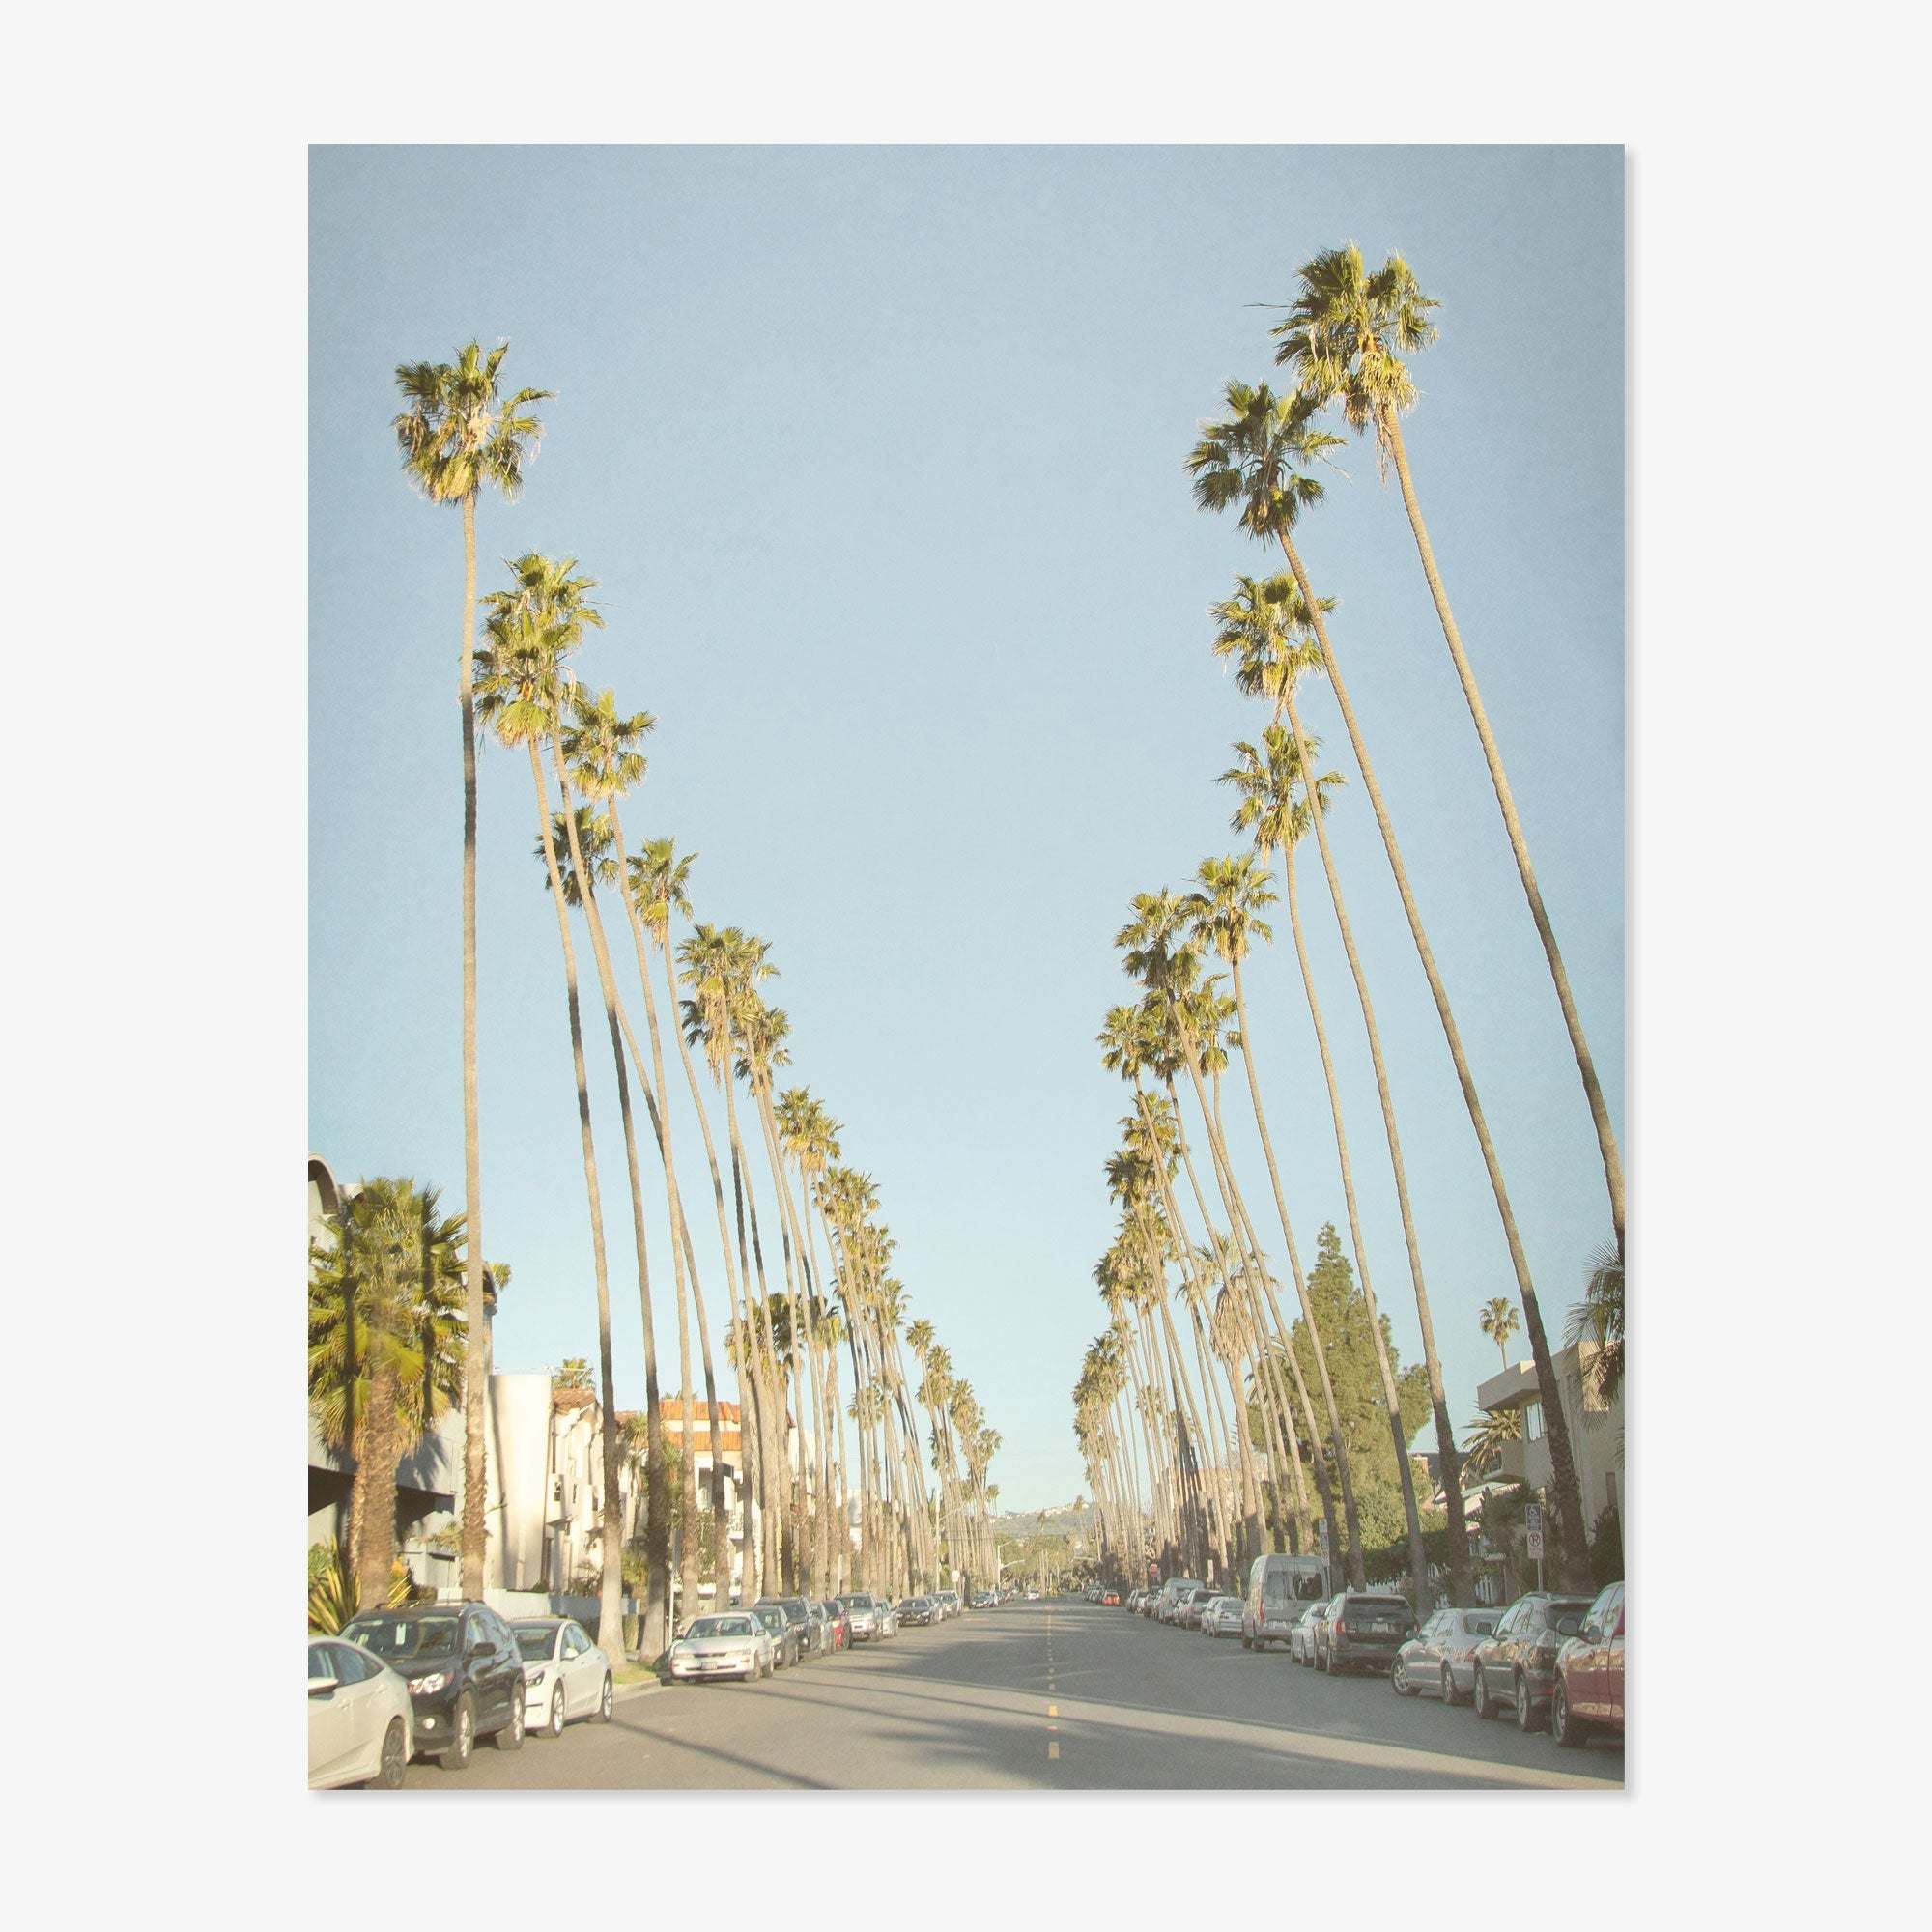 A scenic view of Los Angeles Palm Tree Lined Street &#39;Sunset Boulevard Dreams&#39; lined with tall palm trees under a clear sky, with cars parked along both sides of the road. The setting gives a warm, sunny ambiance by Offley Green.